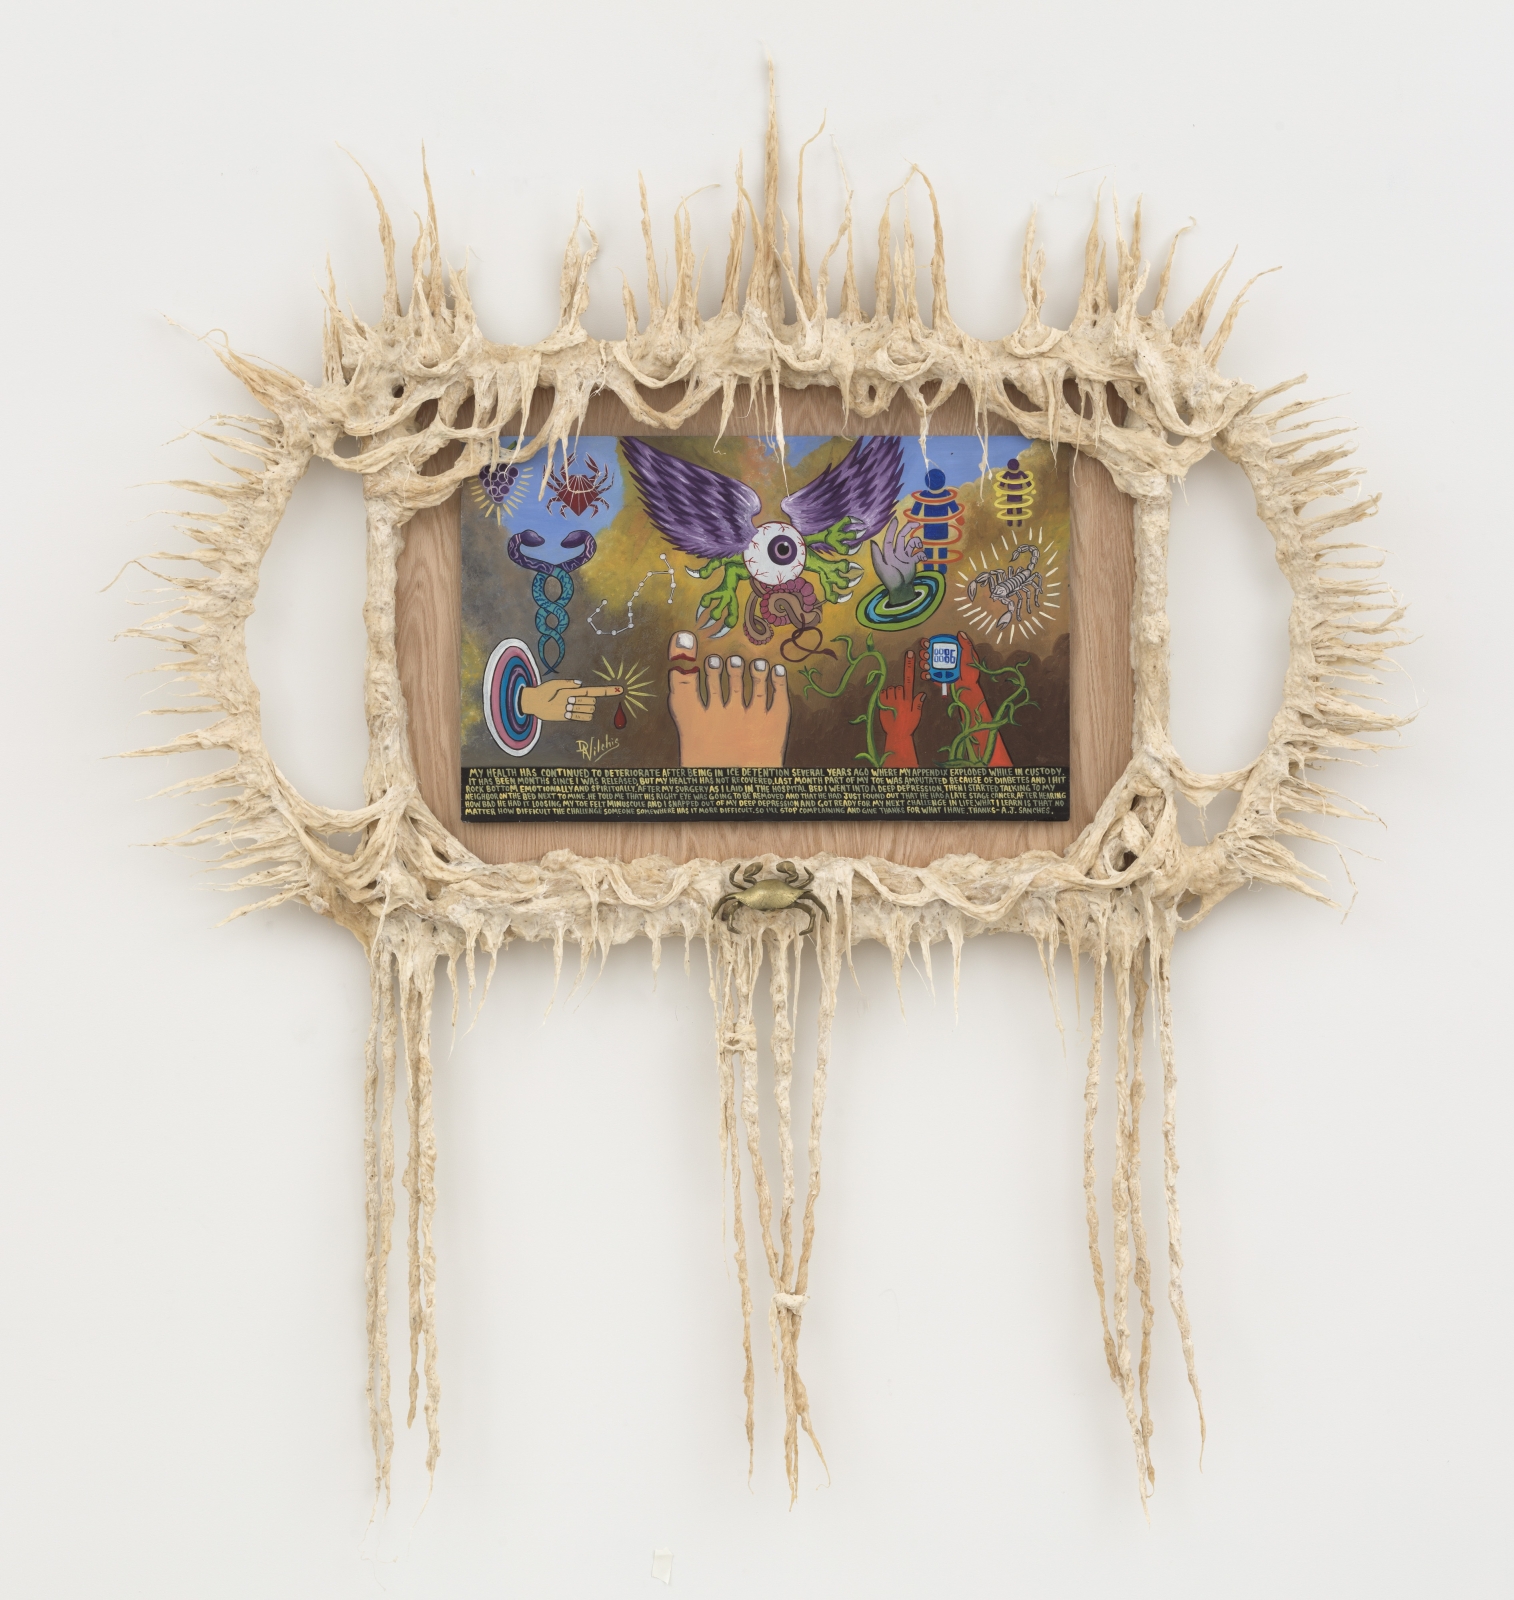 Guadalupe Maravilla
My health has continued to deteriorate Retablo, 2021
oil on tin, cotton, glue mixture, wood and found bronze crab
76 1/2 x 69 x 9 ins.
194.3 x 175.3 x 22.9 cm